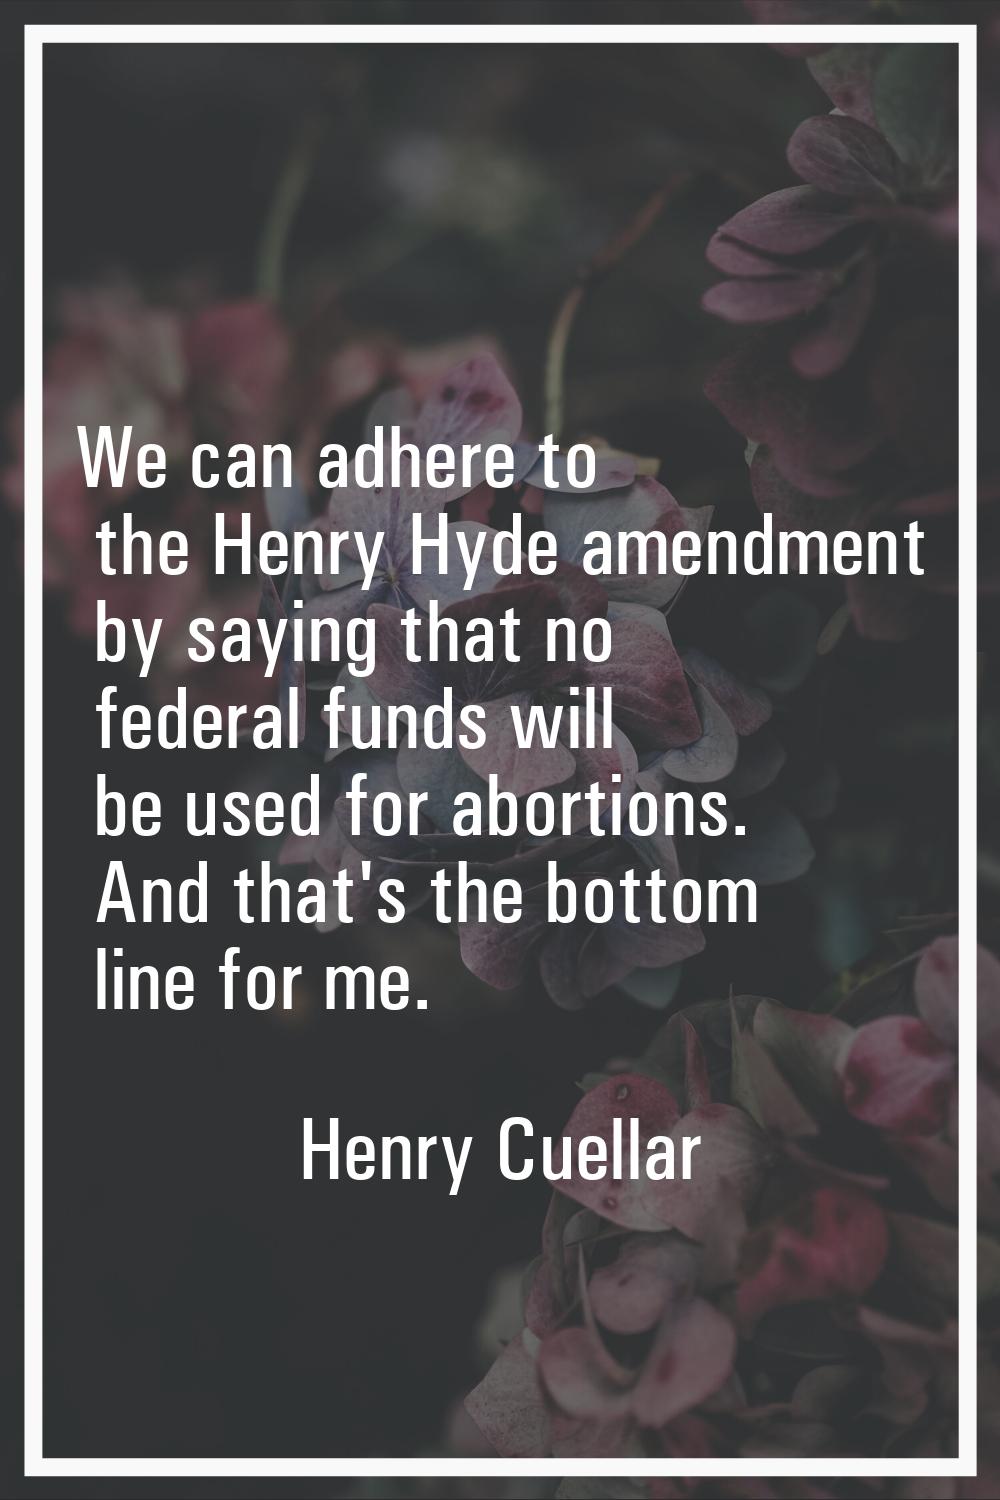 We can adhere to the Henry Hyde amendment by saying that no federal funds will be used for abortion